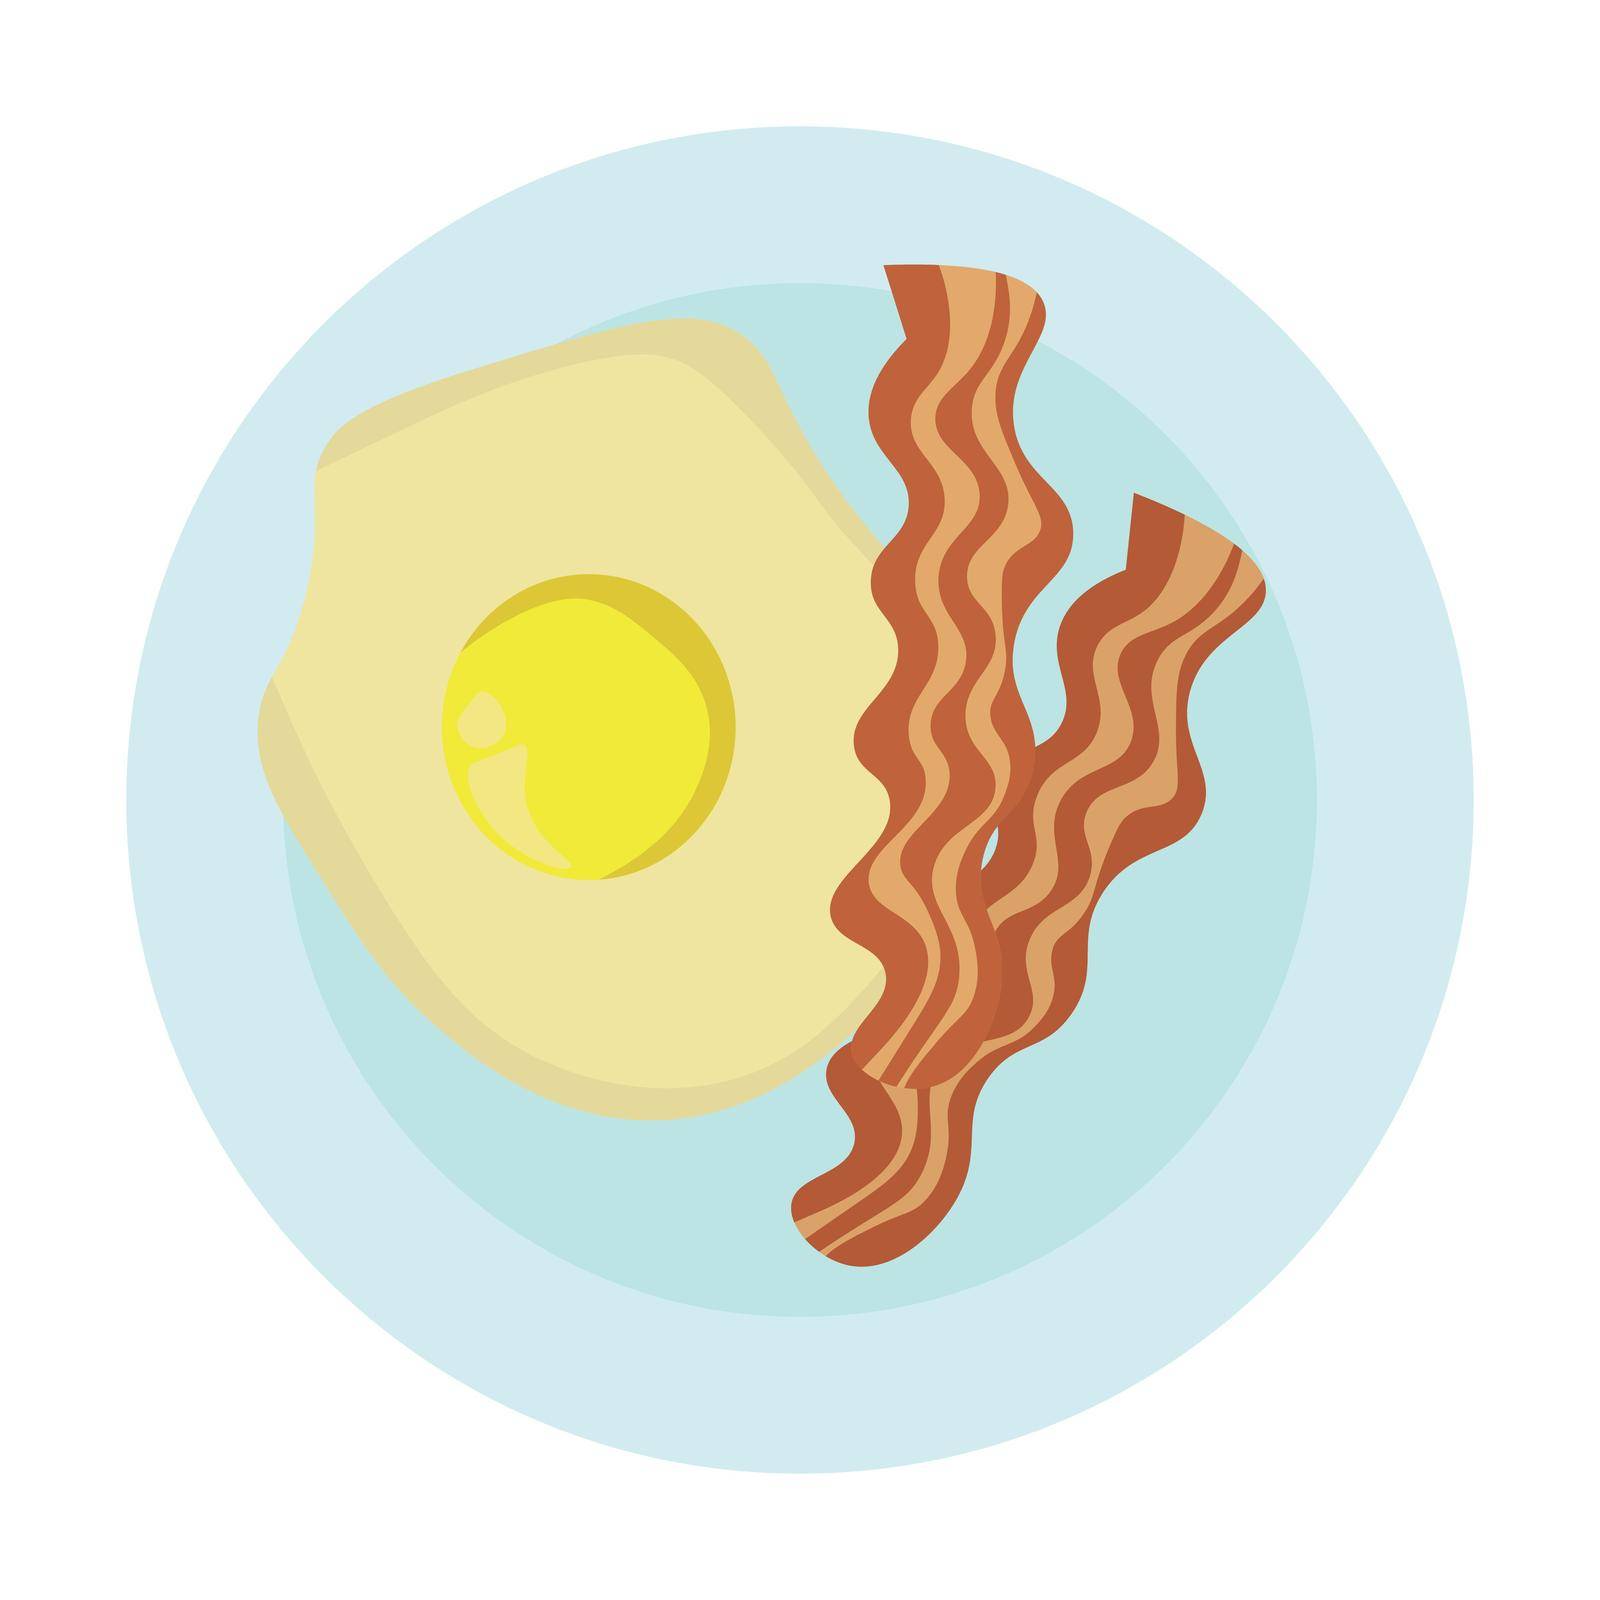 Fried eggs and bacon on a plate, a popular breakfast by Sunny_Coloring